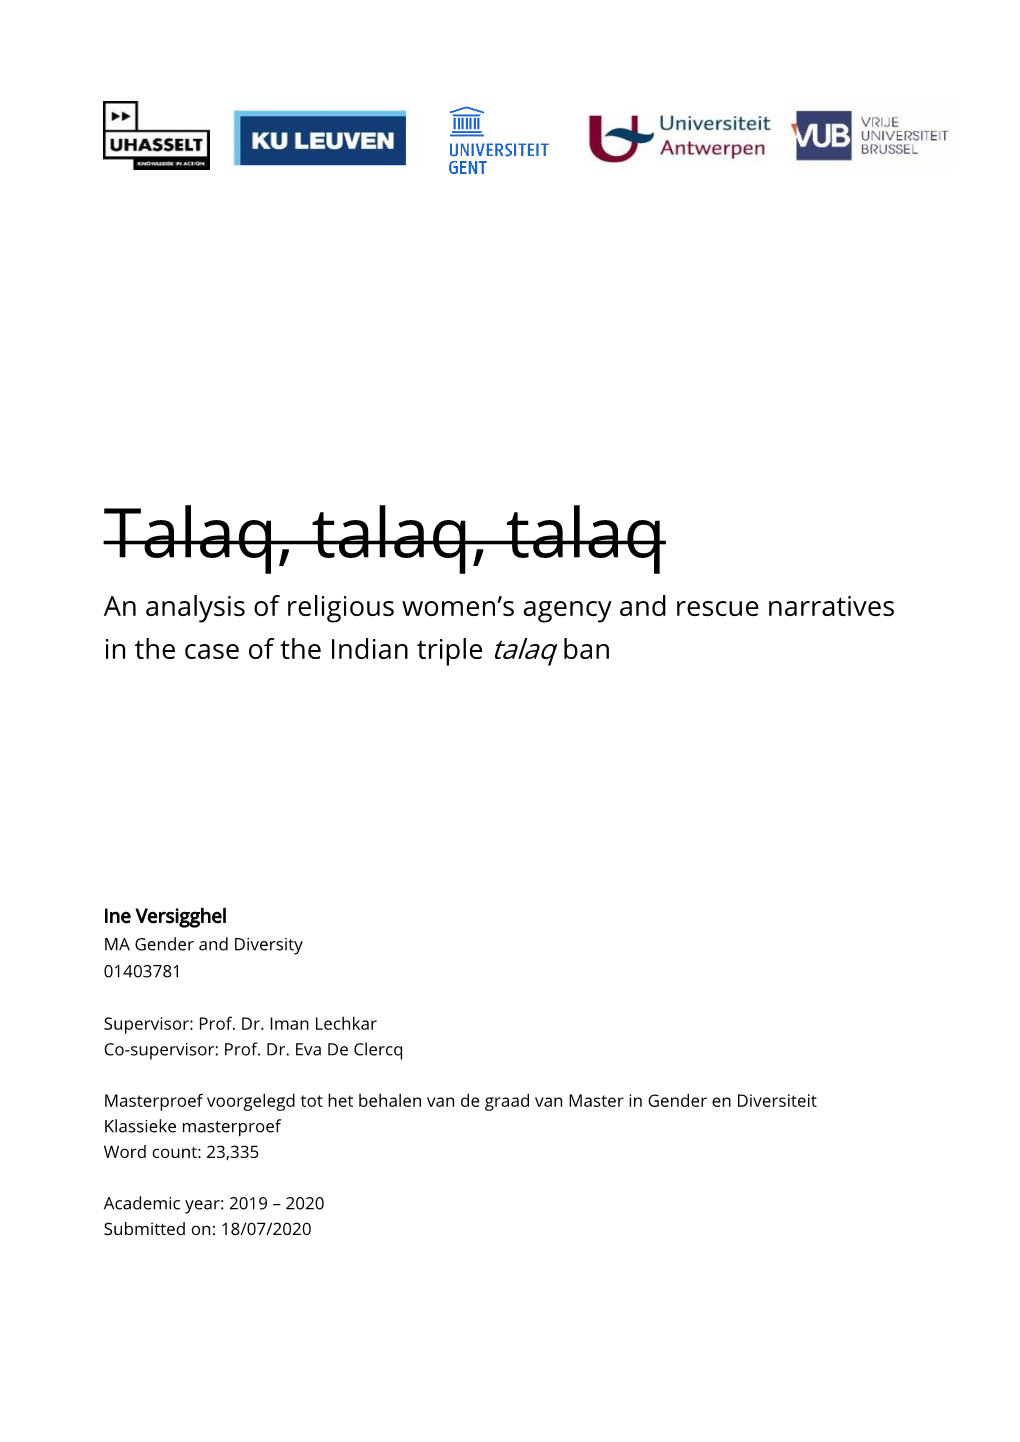 Talaq, Talaq, Talaq an Analysis of Religious Women’S Agency and Rescue Narratives in the Case of the Indian Triple Talaq Ban